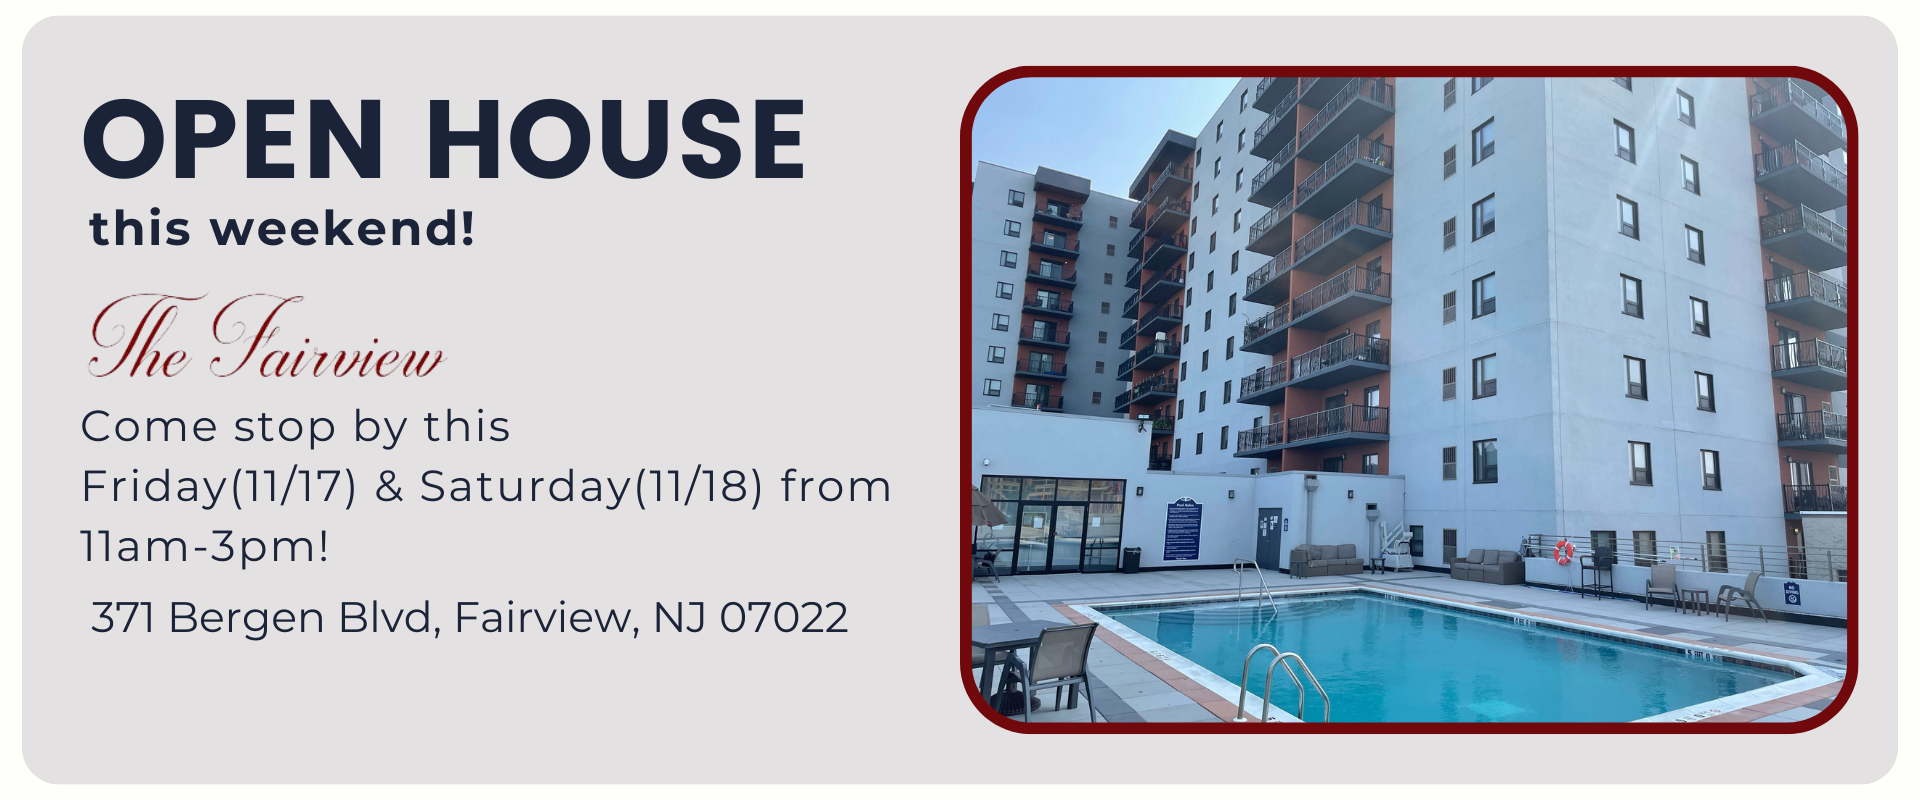 OPEN HOUSE this weekend! Come stop by this  Friday(11/17) & Saturday(11/18) from  11am-3pm! 371 Bergen Blvd, Fairview, NJ 07022